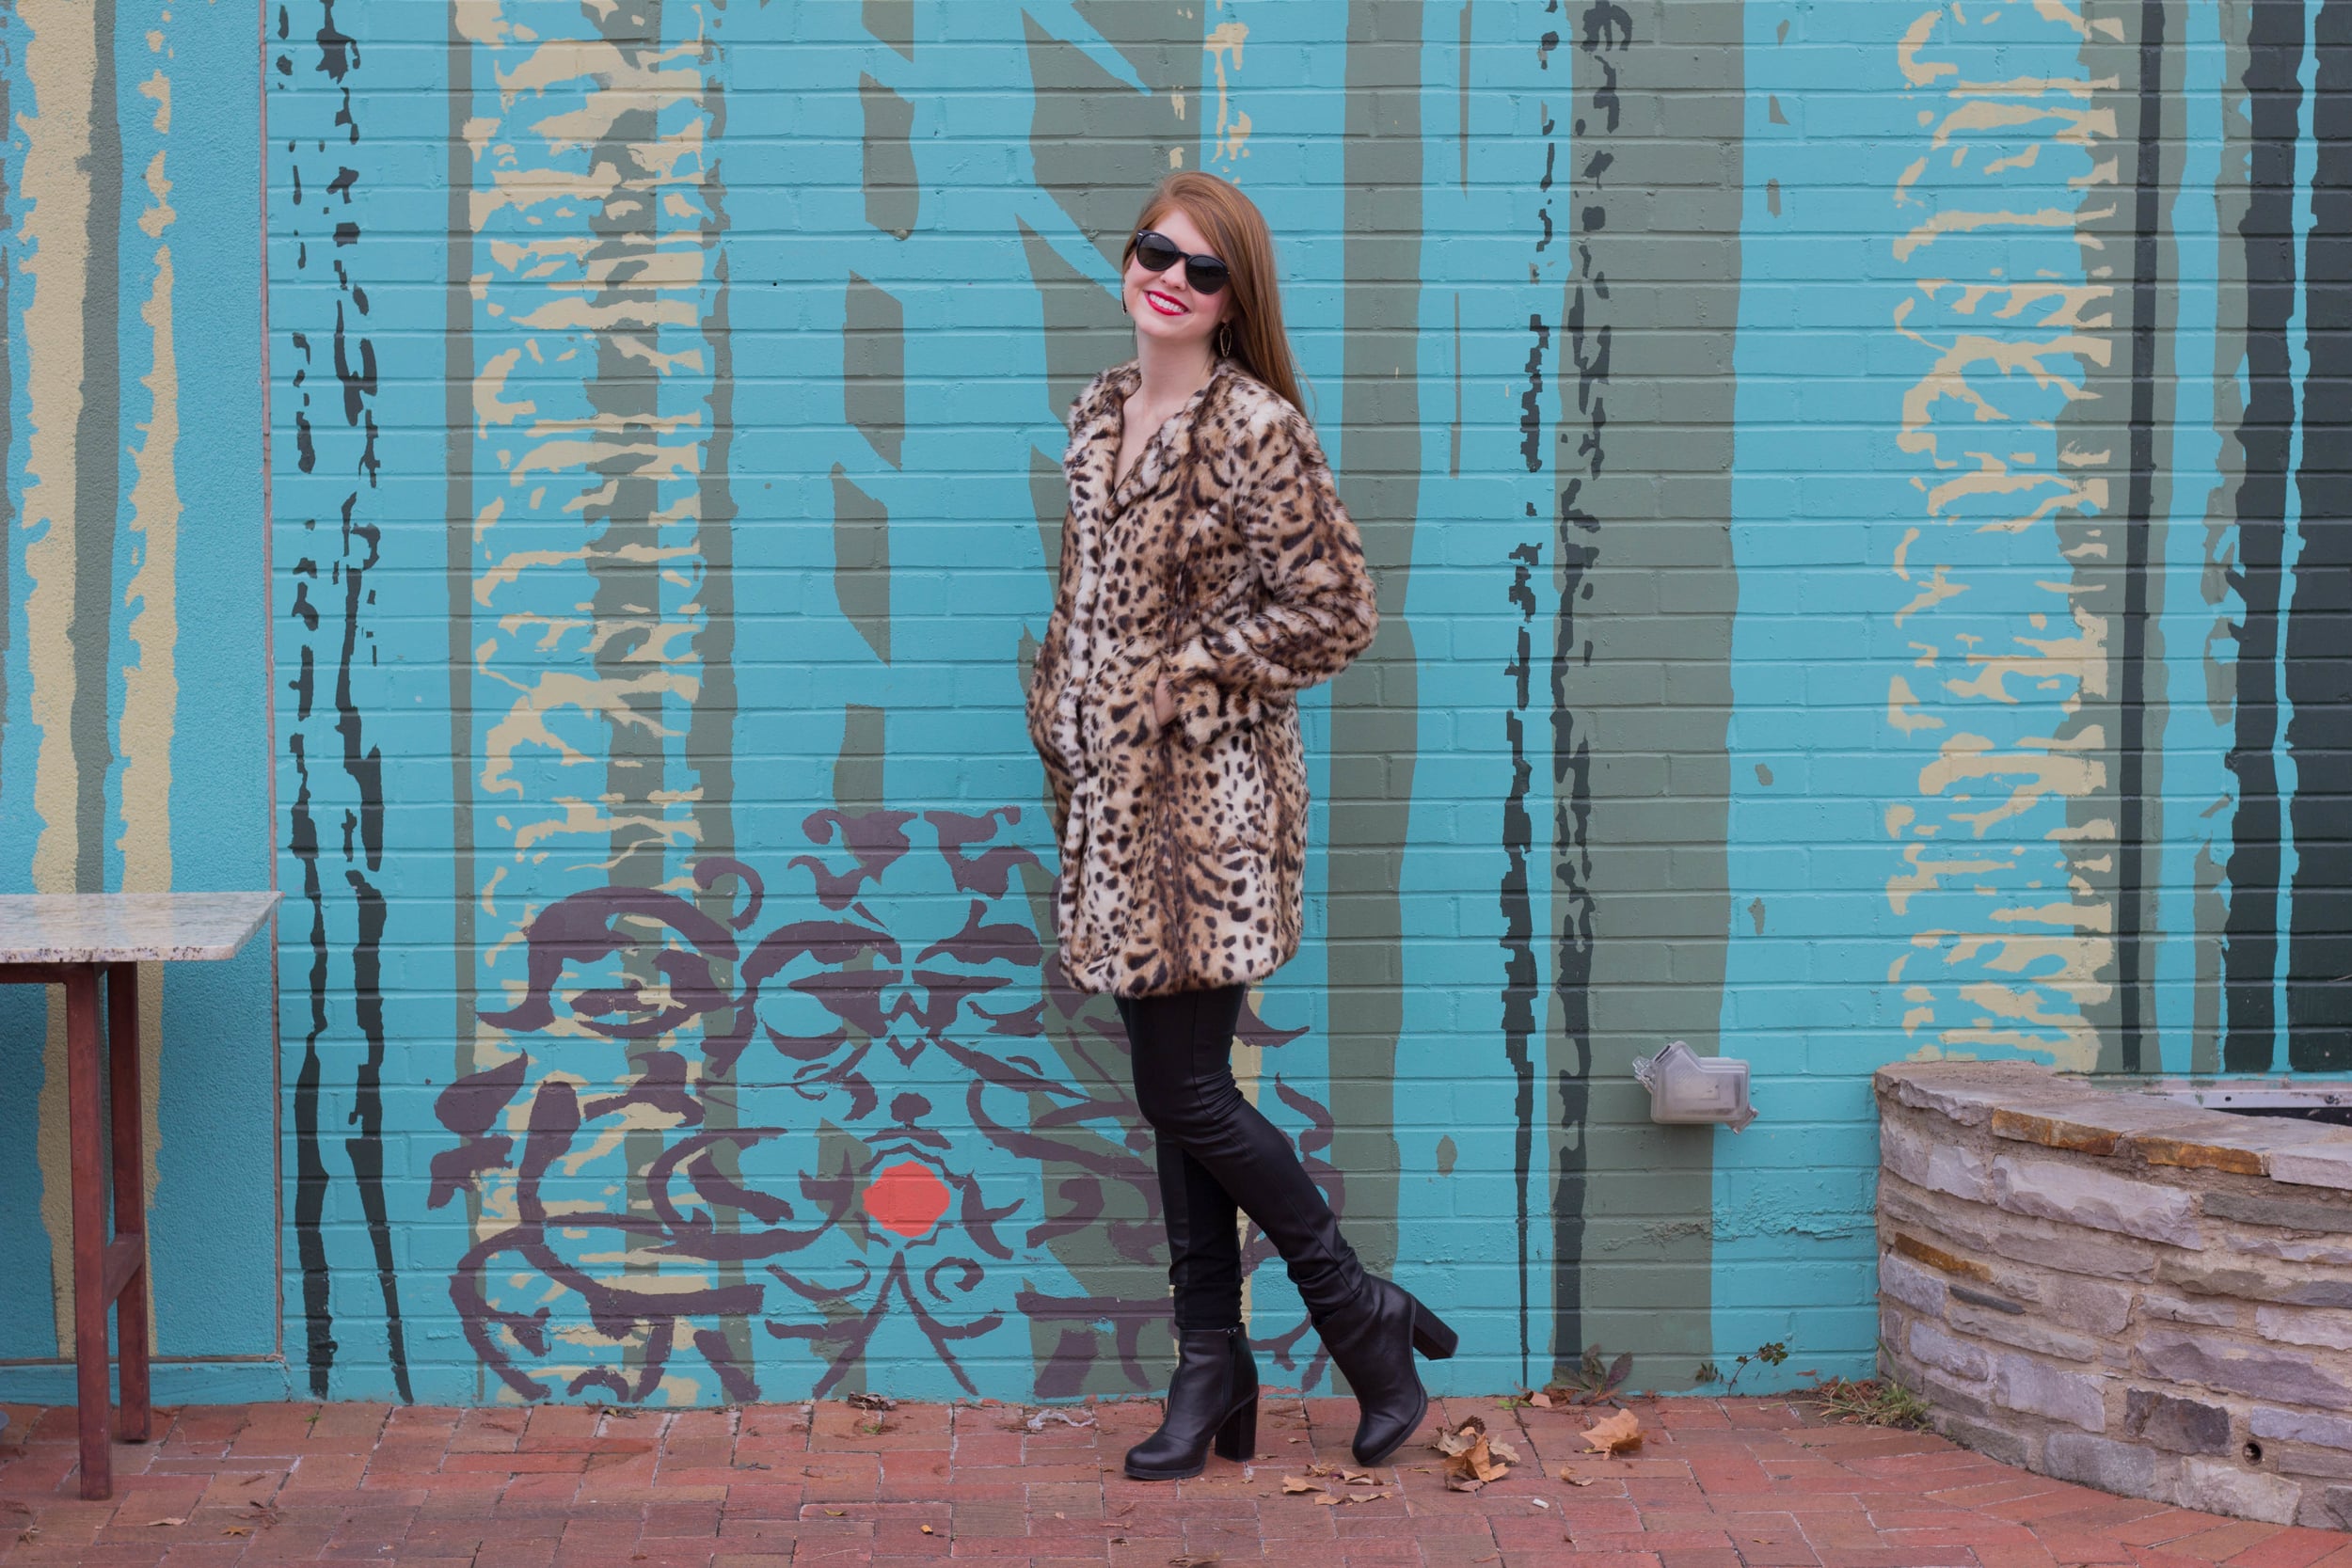 leopard coat, leather joggers, black raybans, red lip